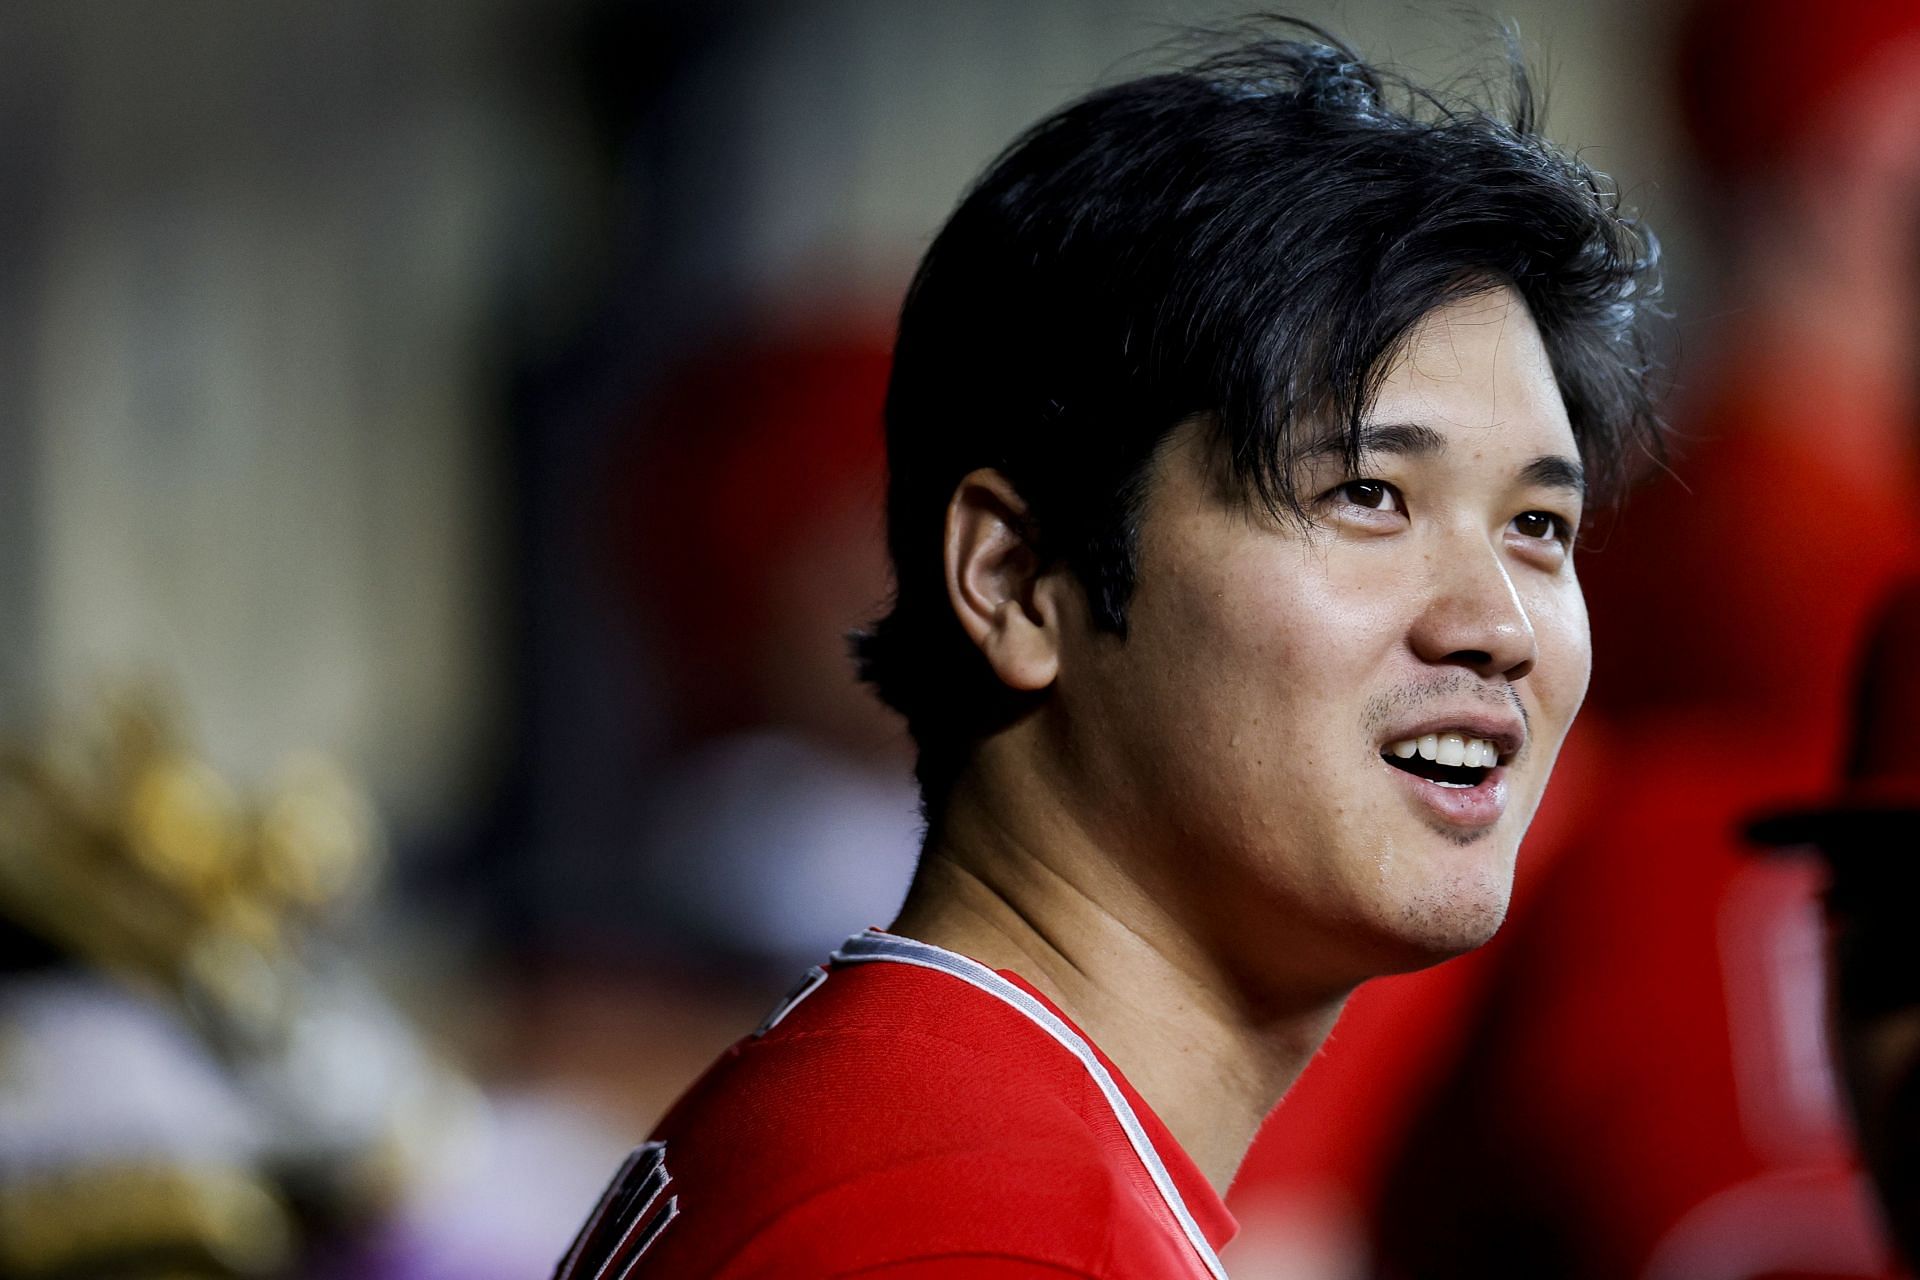 Shohei Ohtani interacts with teammates prior to facing the Houston Astros at Minute Maid Park